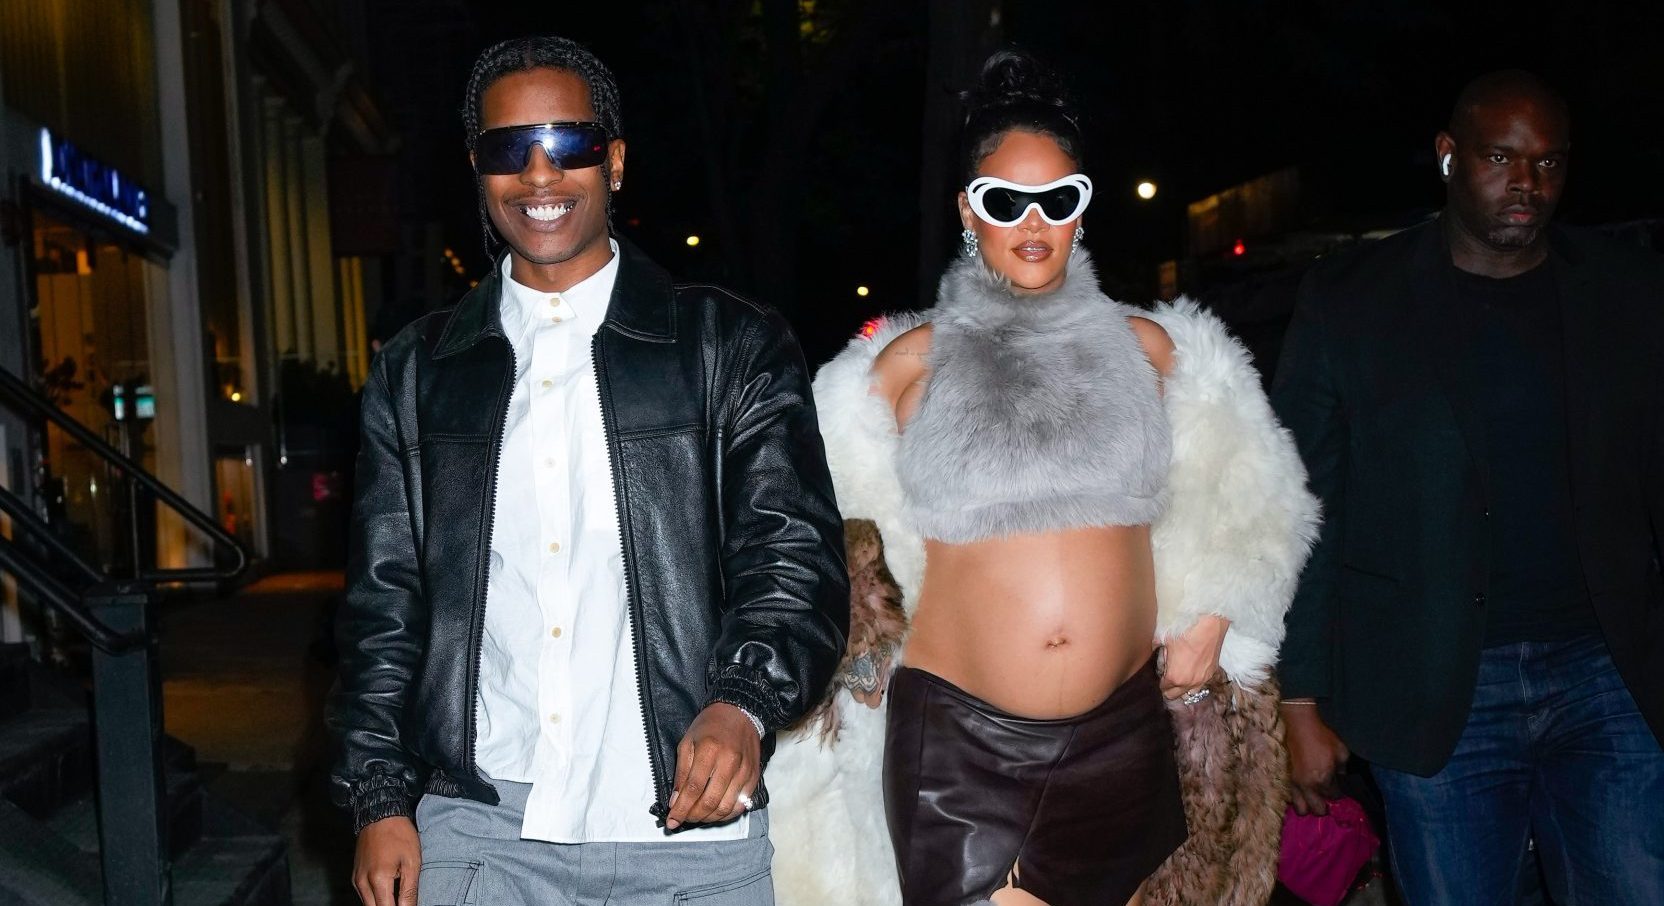 Family Of 4! Rihanna & A$AP Rocky Reportedly Welcomed Their Second Child Together